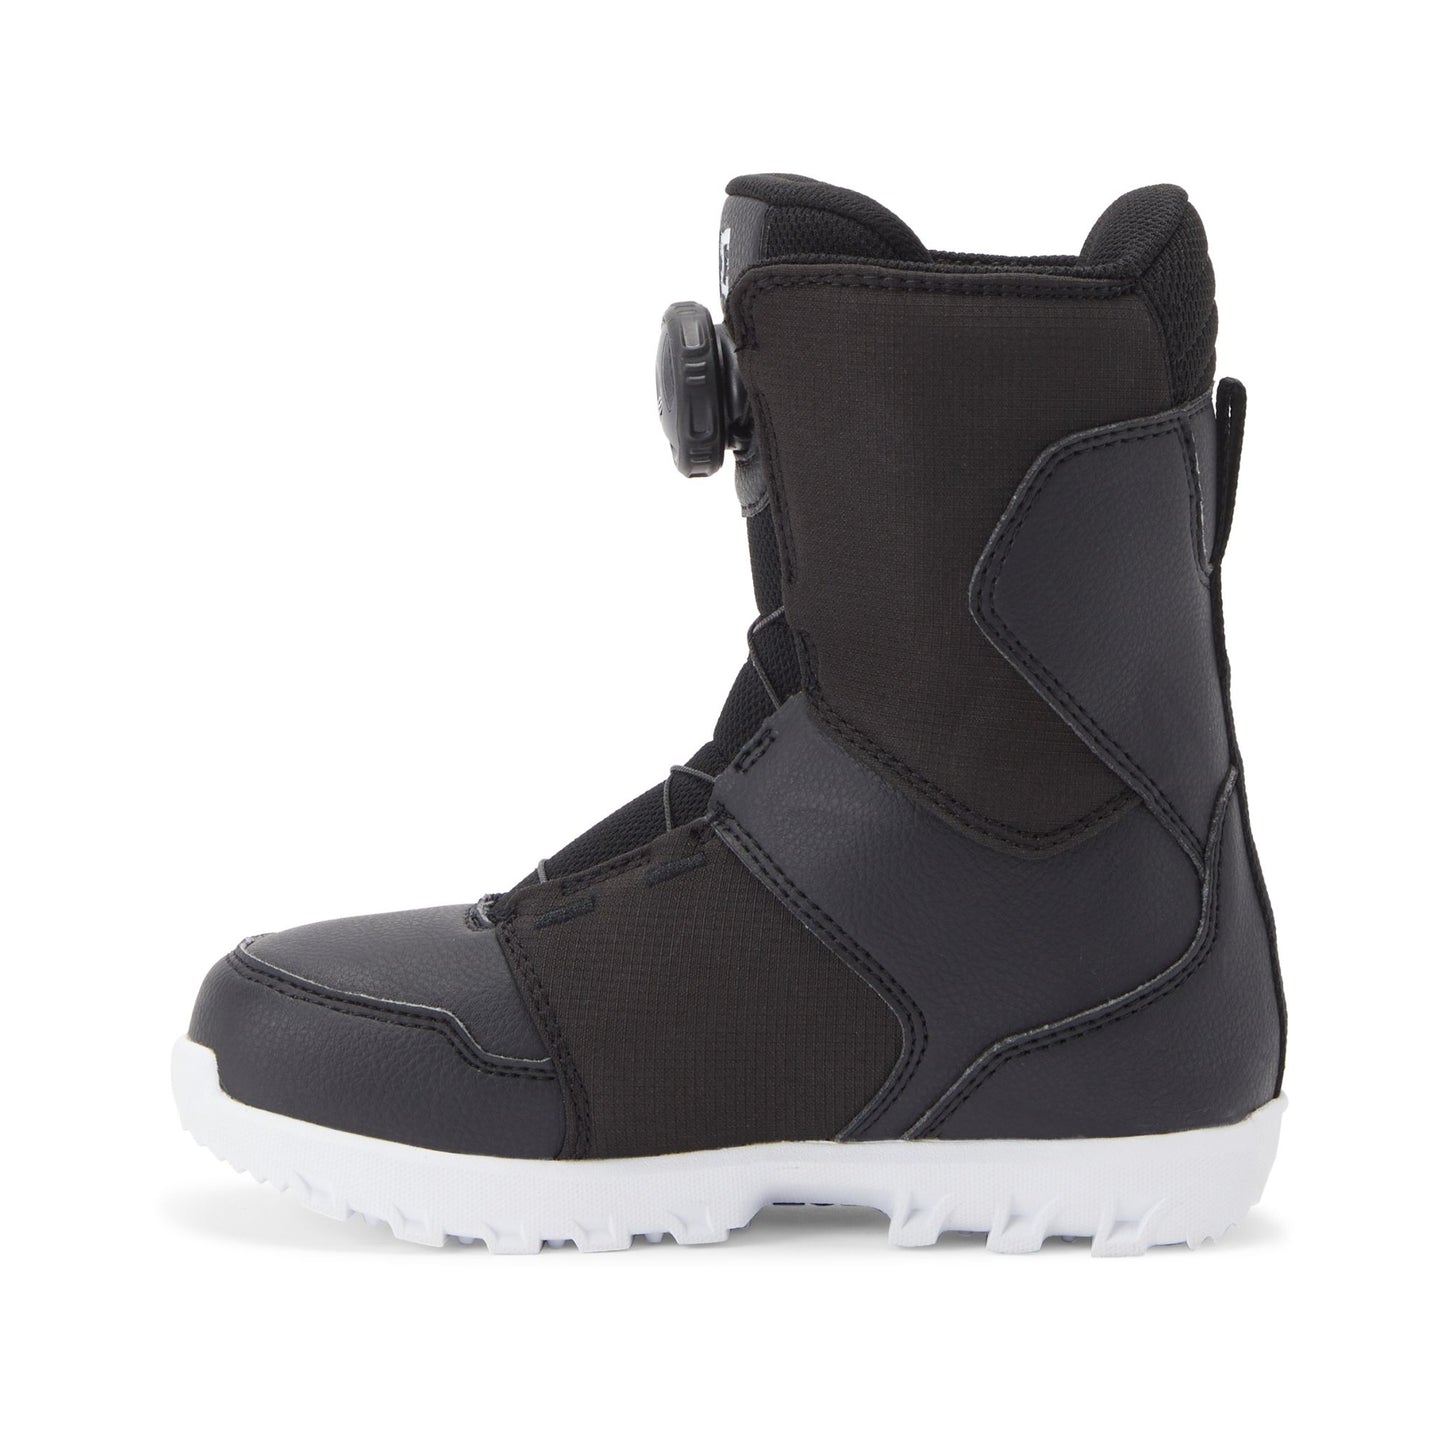 DC Youth Scout BOA Snowboard Boots Black/White Snowboard Boots